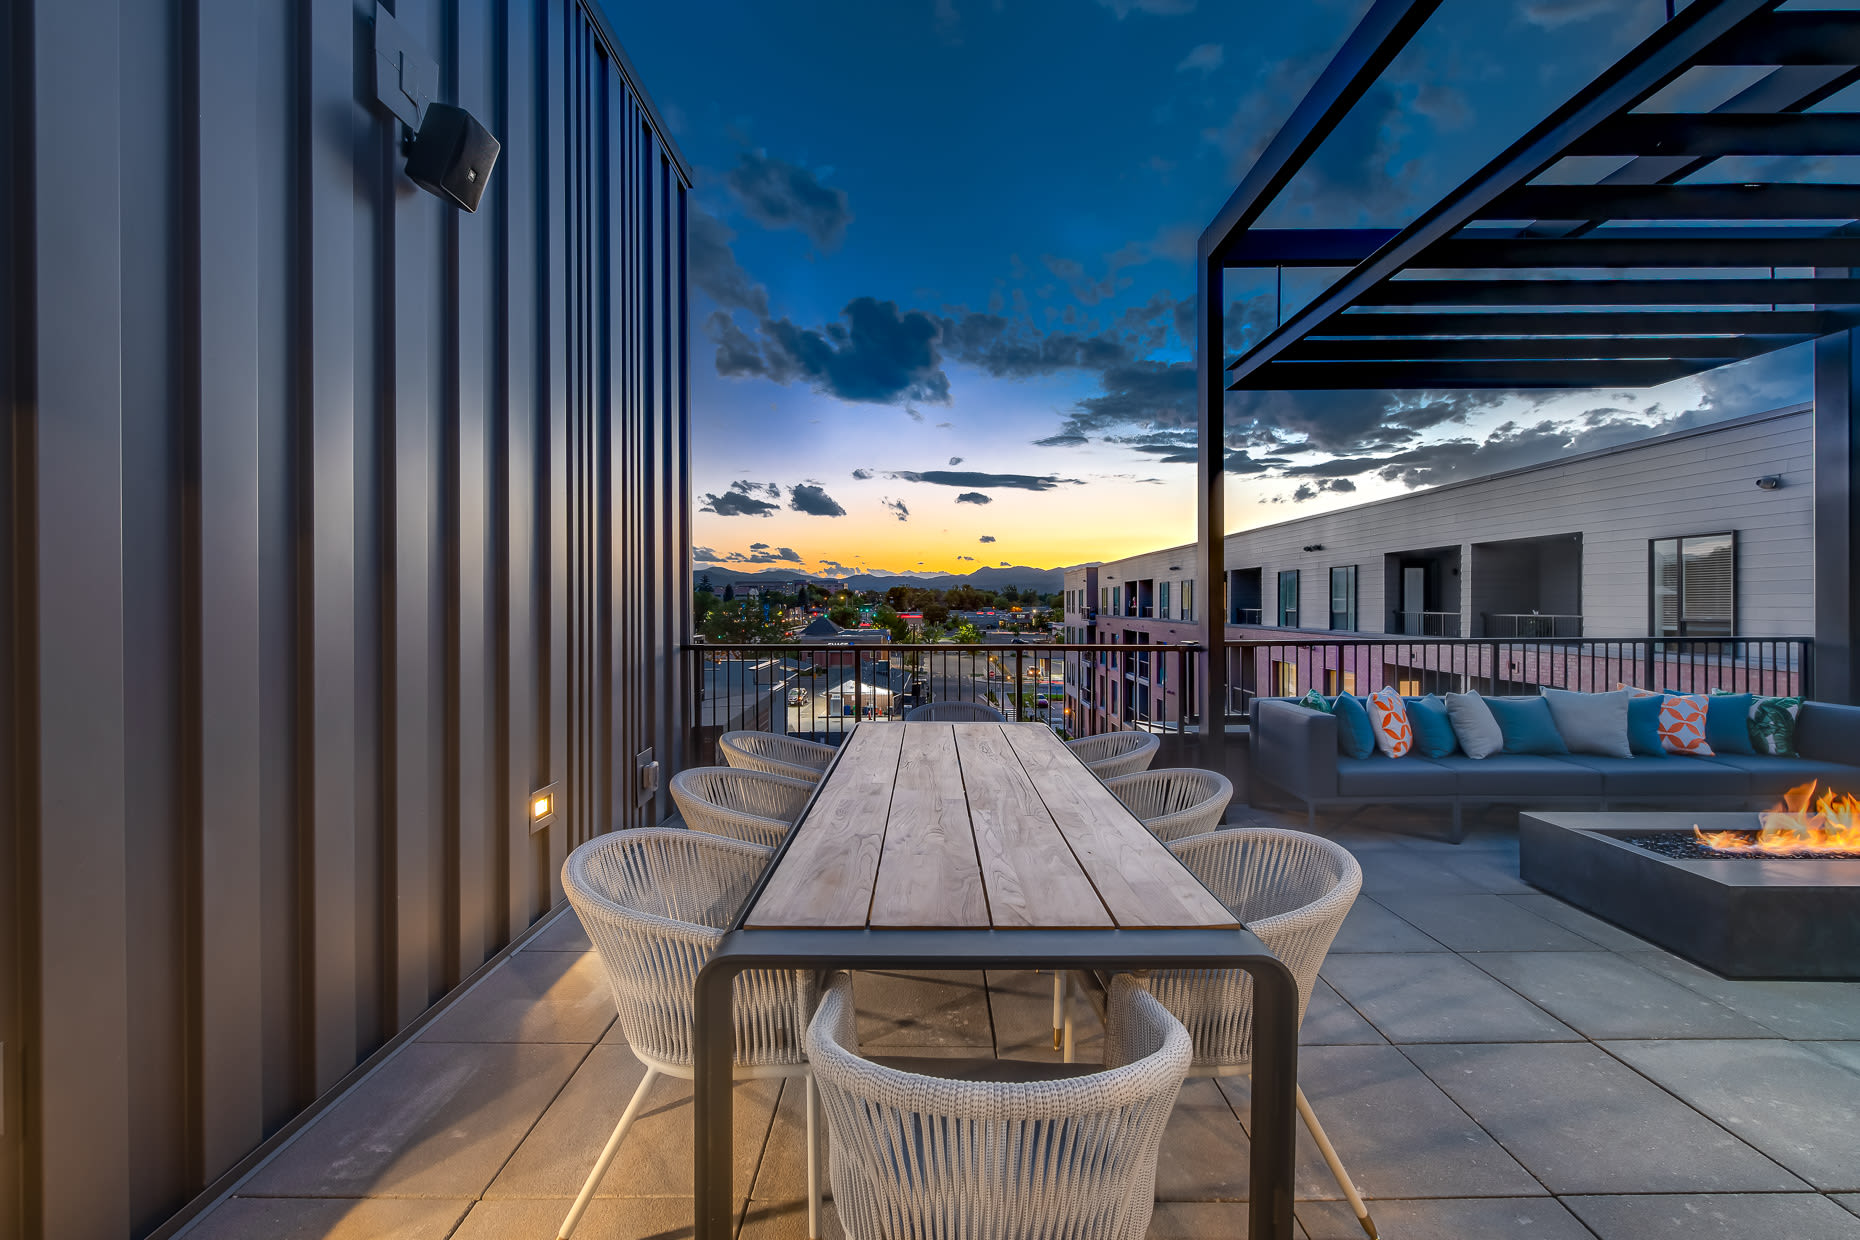 Outdoor firepit and patio area at sunset at  West 38 in Wheat Ridge, Colorado